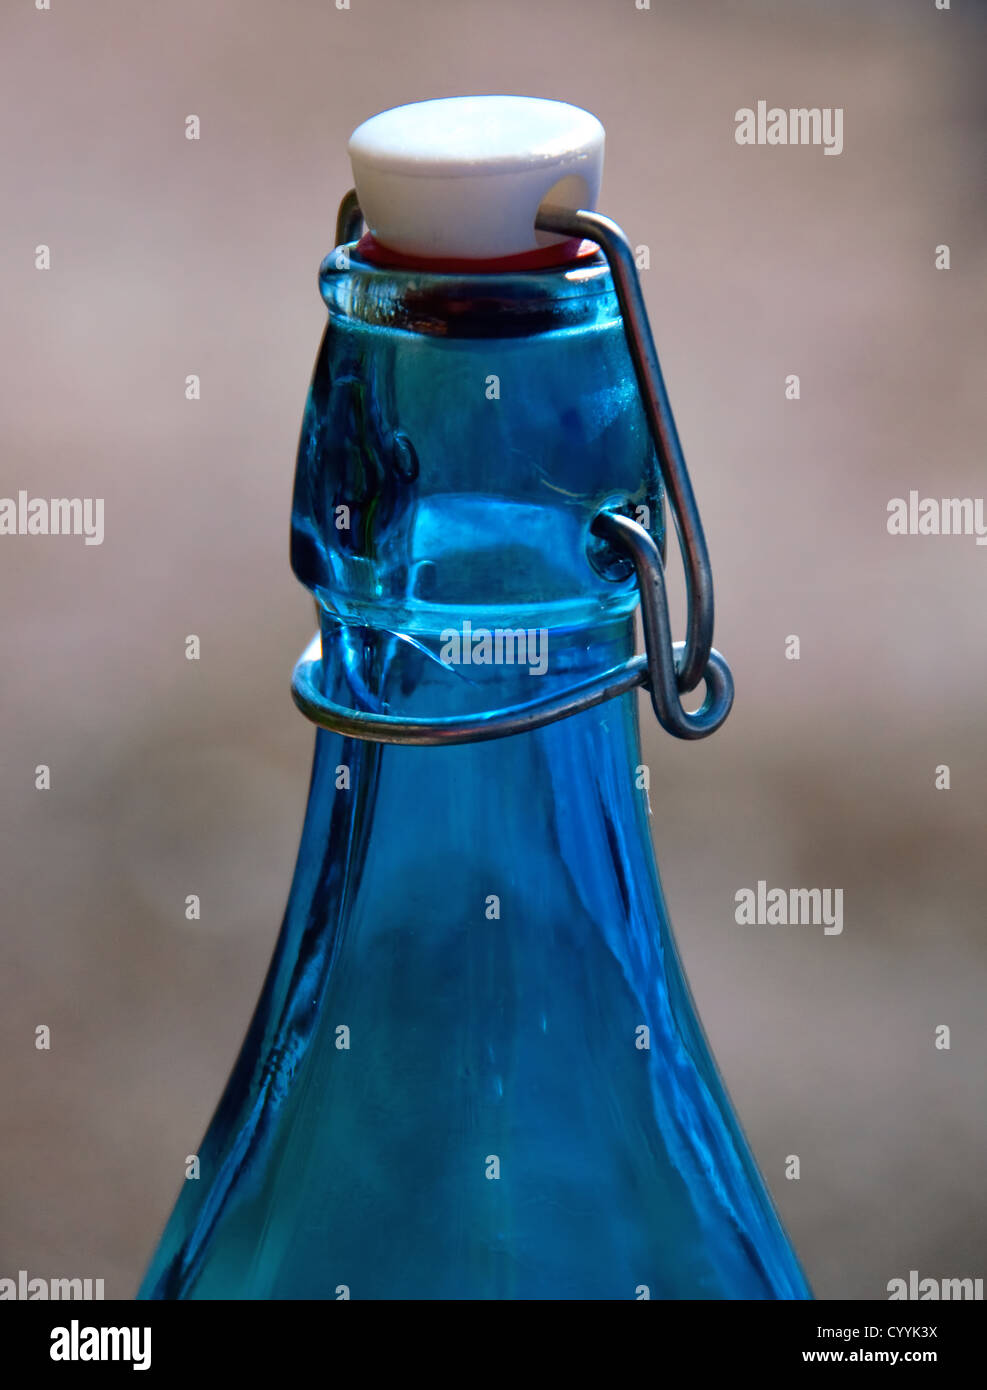 Part of an old vintage bottle Stock Photo